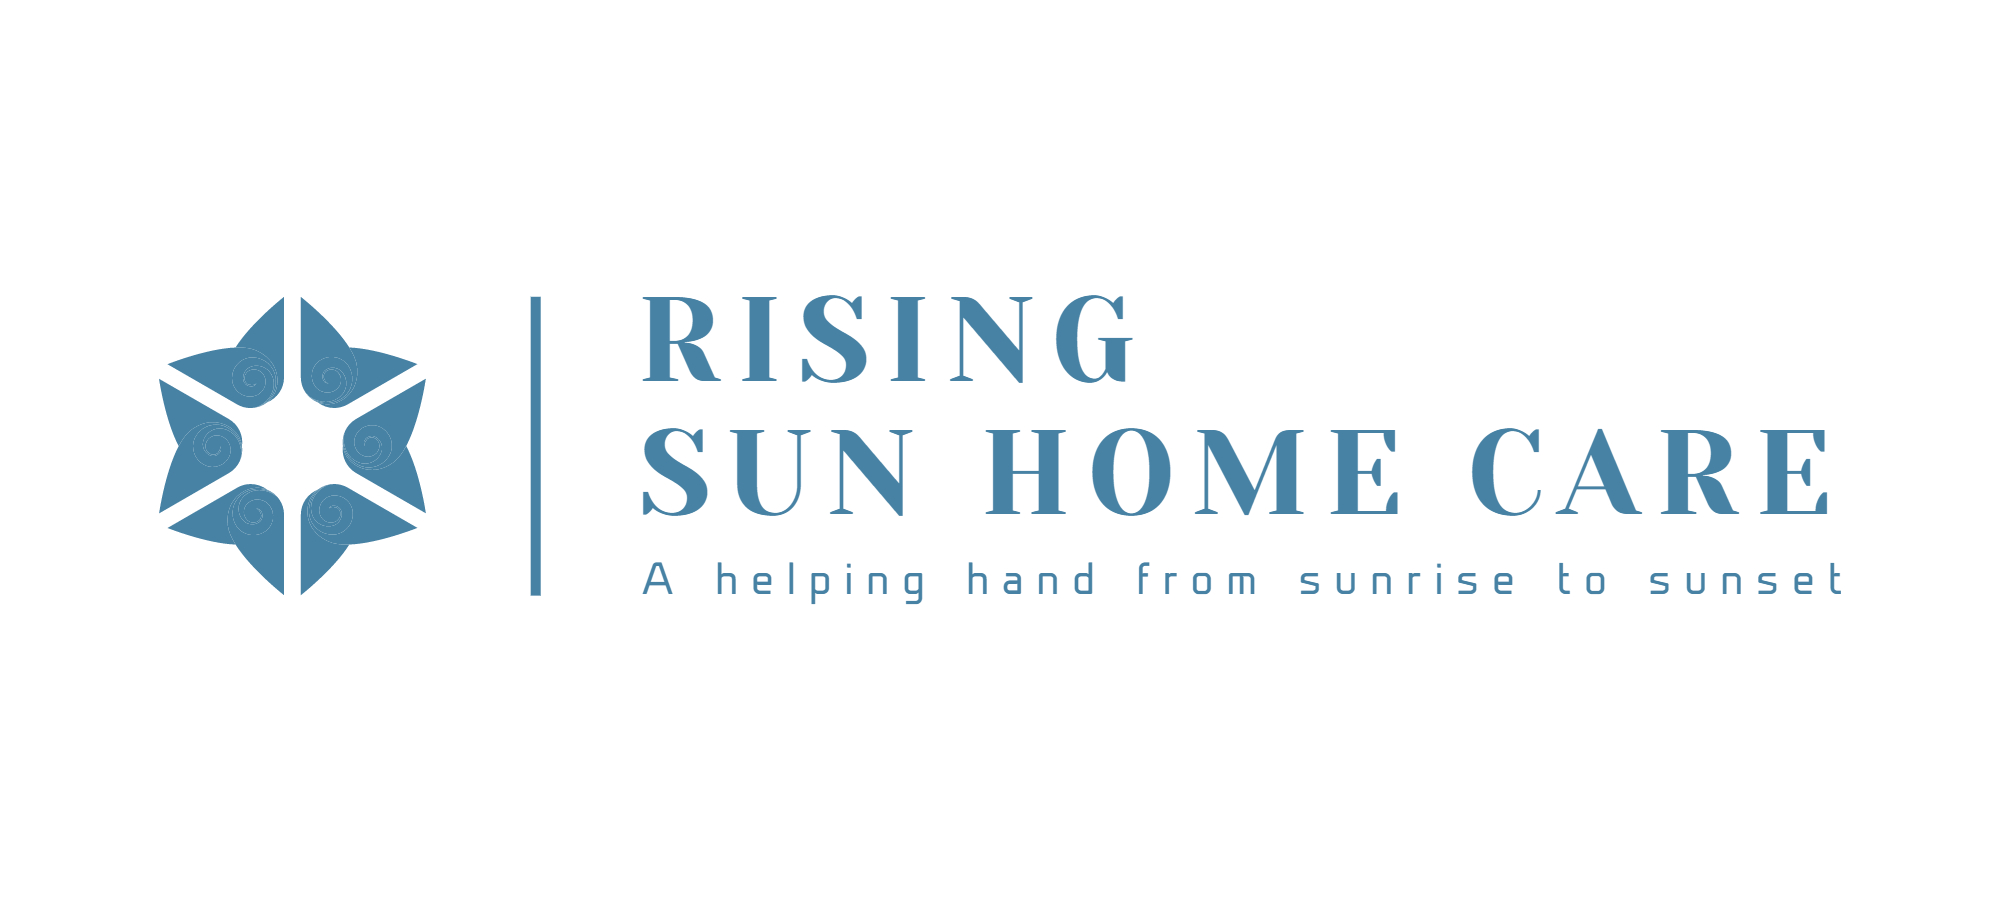 Rising Sun Home Care of PA at Jenkintown, PA